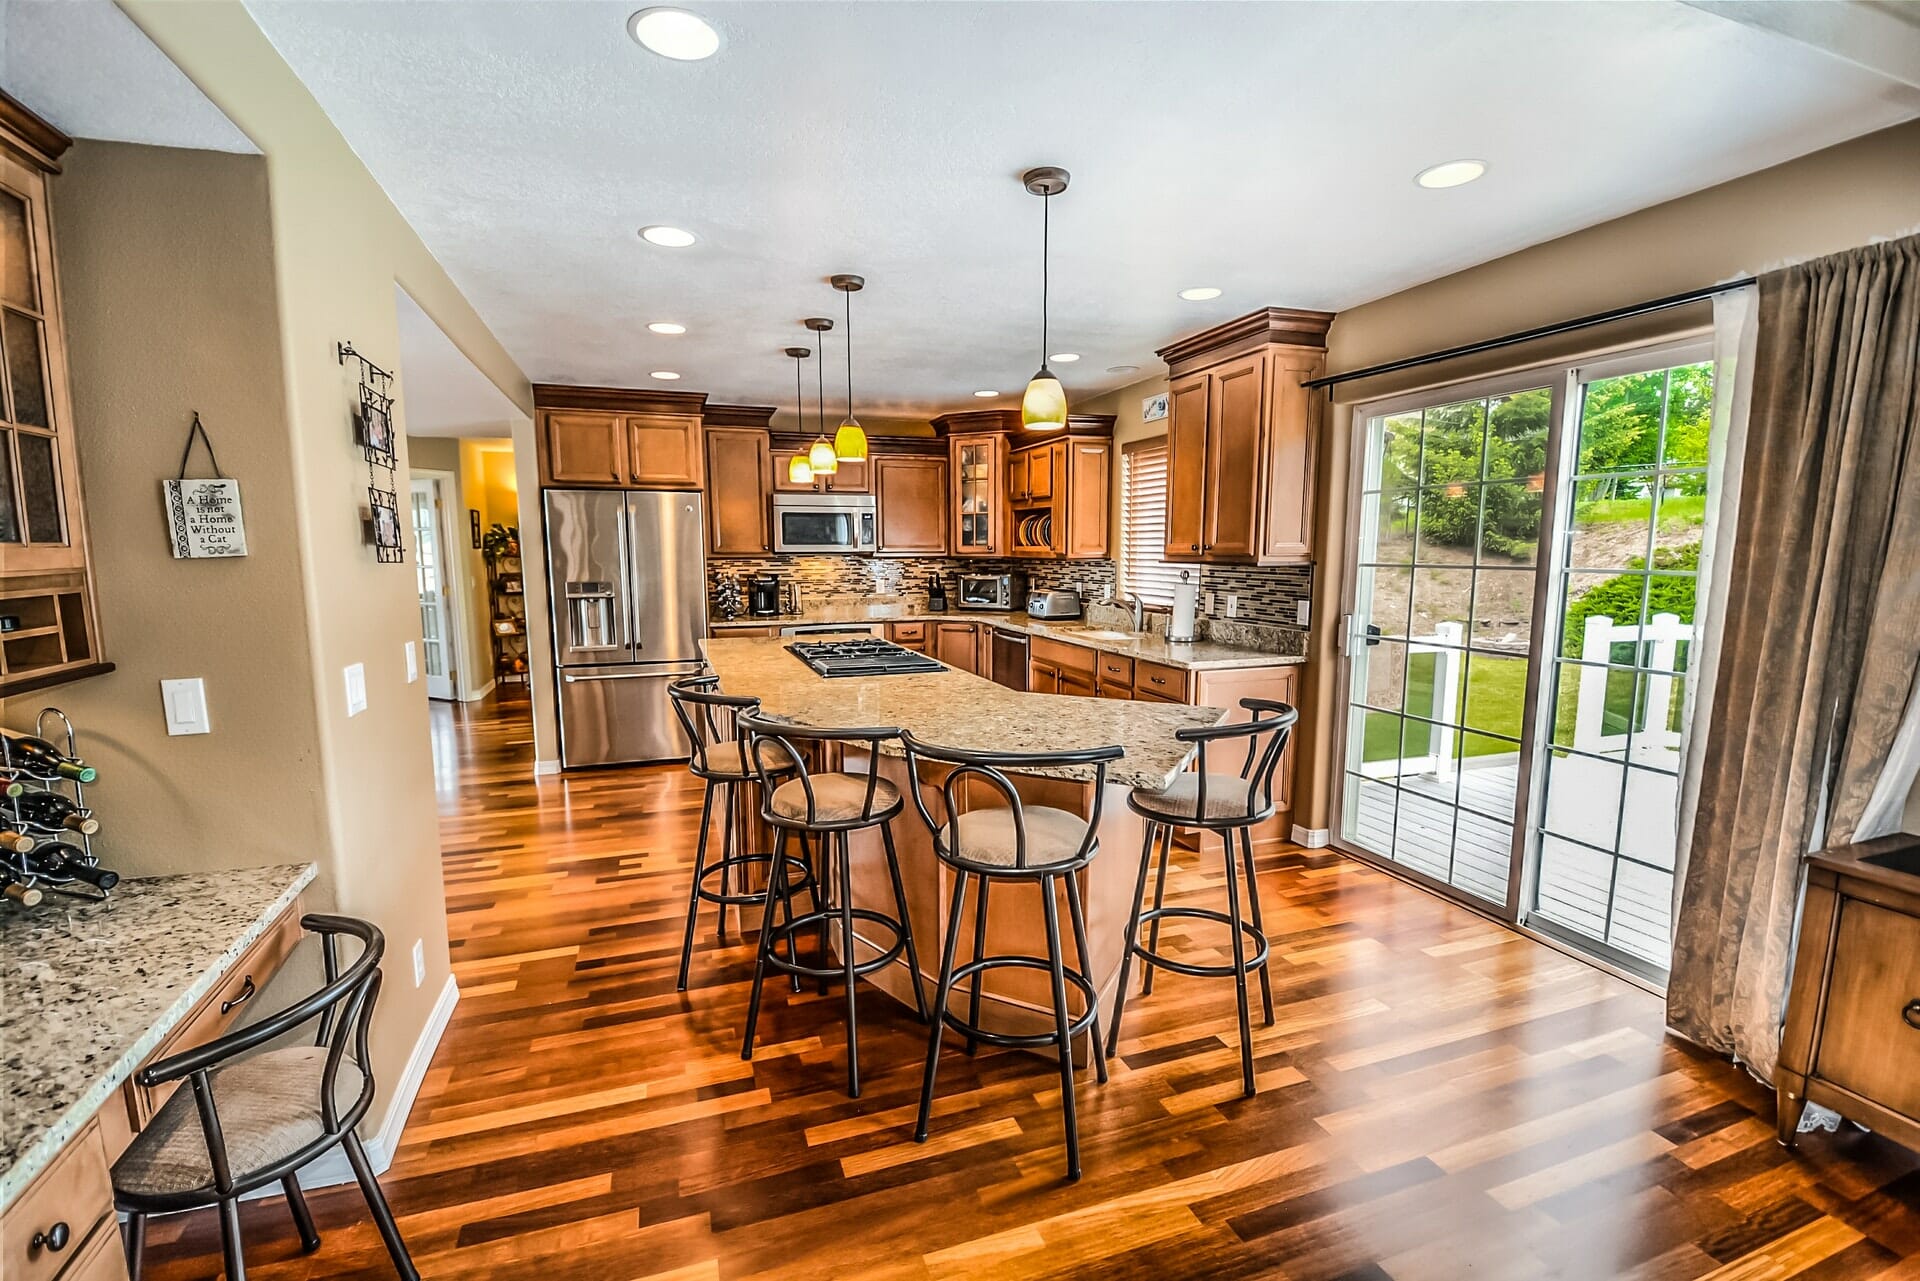 The Pros and Cons of Hardwood Flooring in a Kitchen